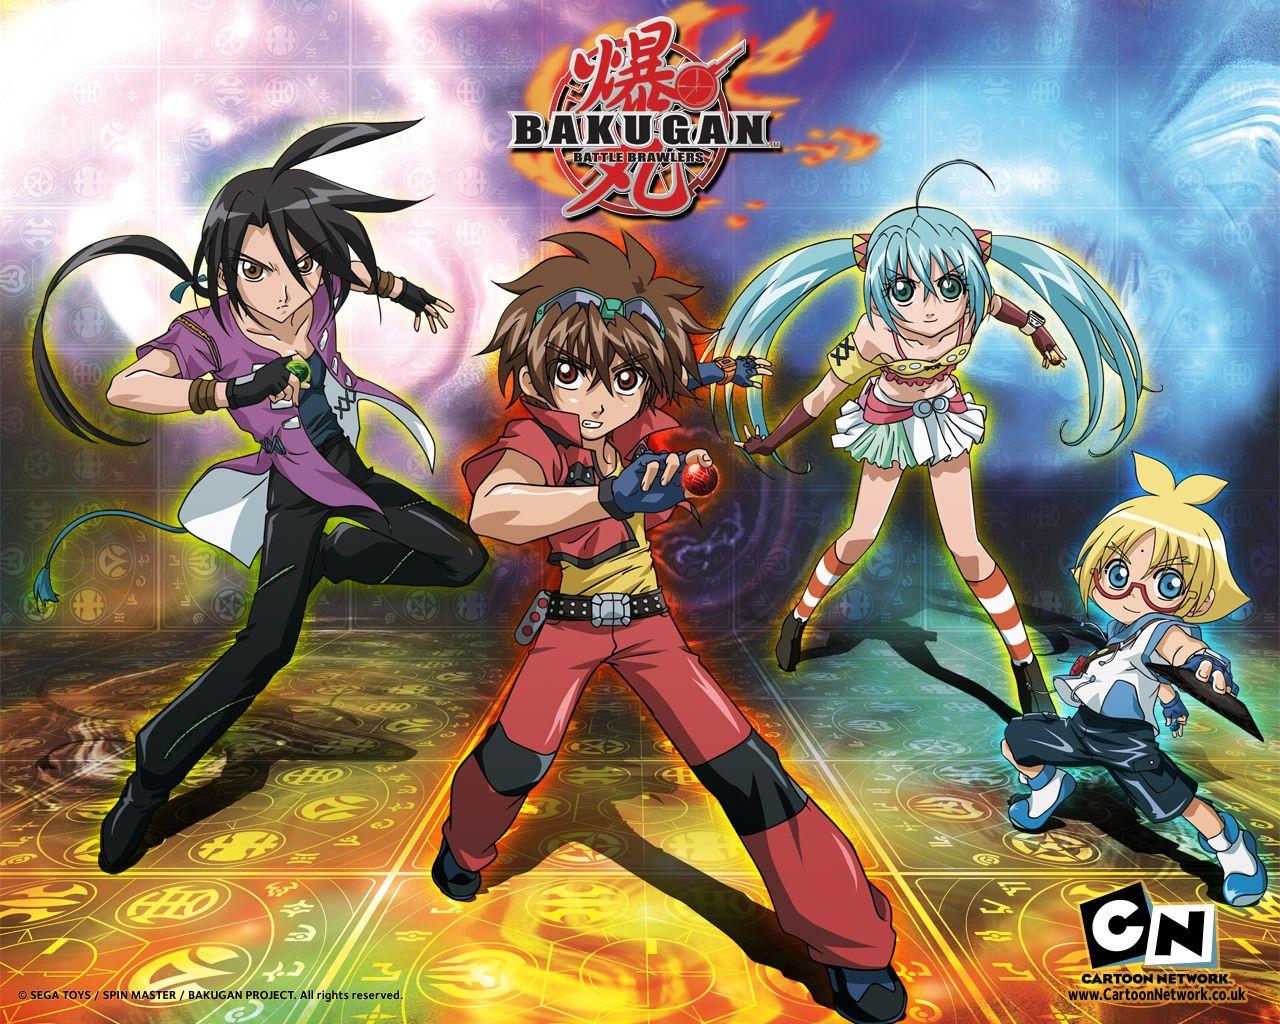 Brawlers image Bakugan HD wallpapers and backgrounds photos.